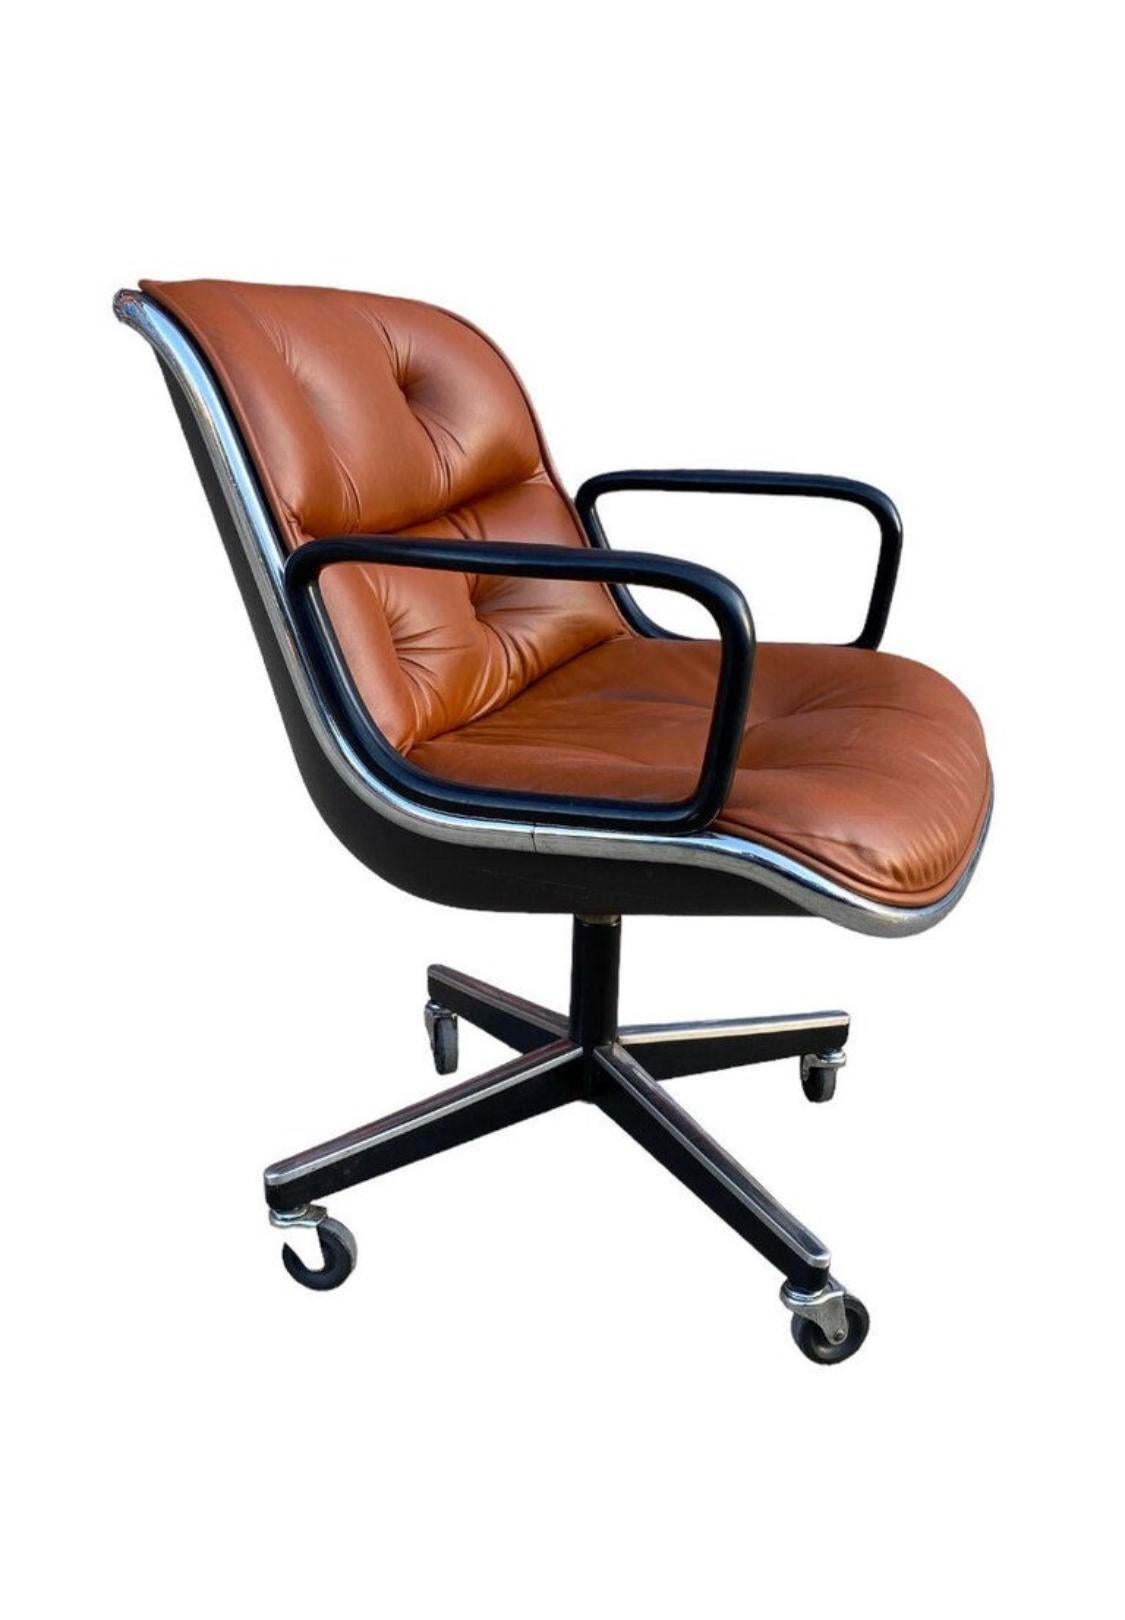 Vintage Charles Pollock for Knoll executive chair in burnt orange leather. This executive desk chair has a tilt and swivel base with adjustable height. Base with all wheels in working condition. Good vintage condition, wear consistent with age and